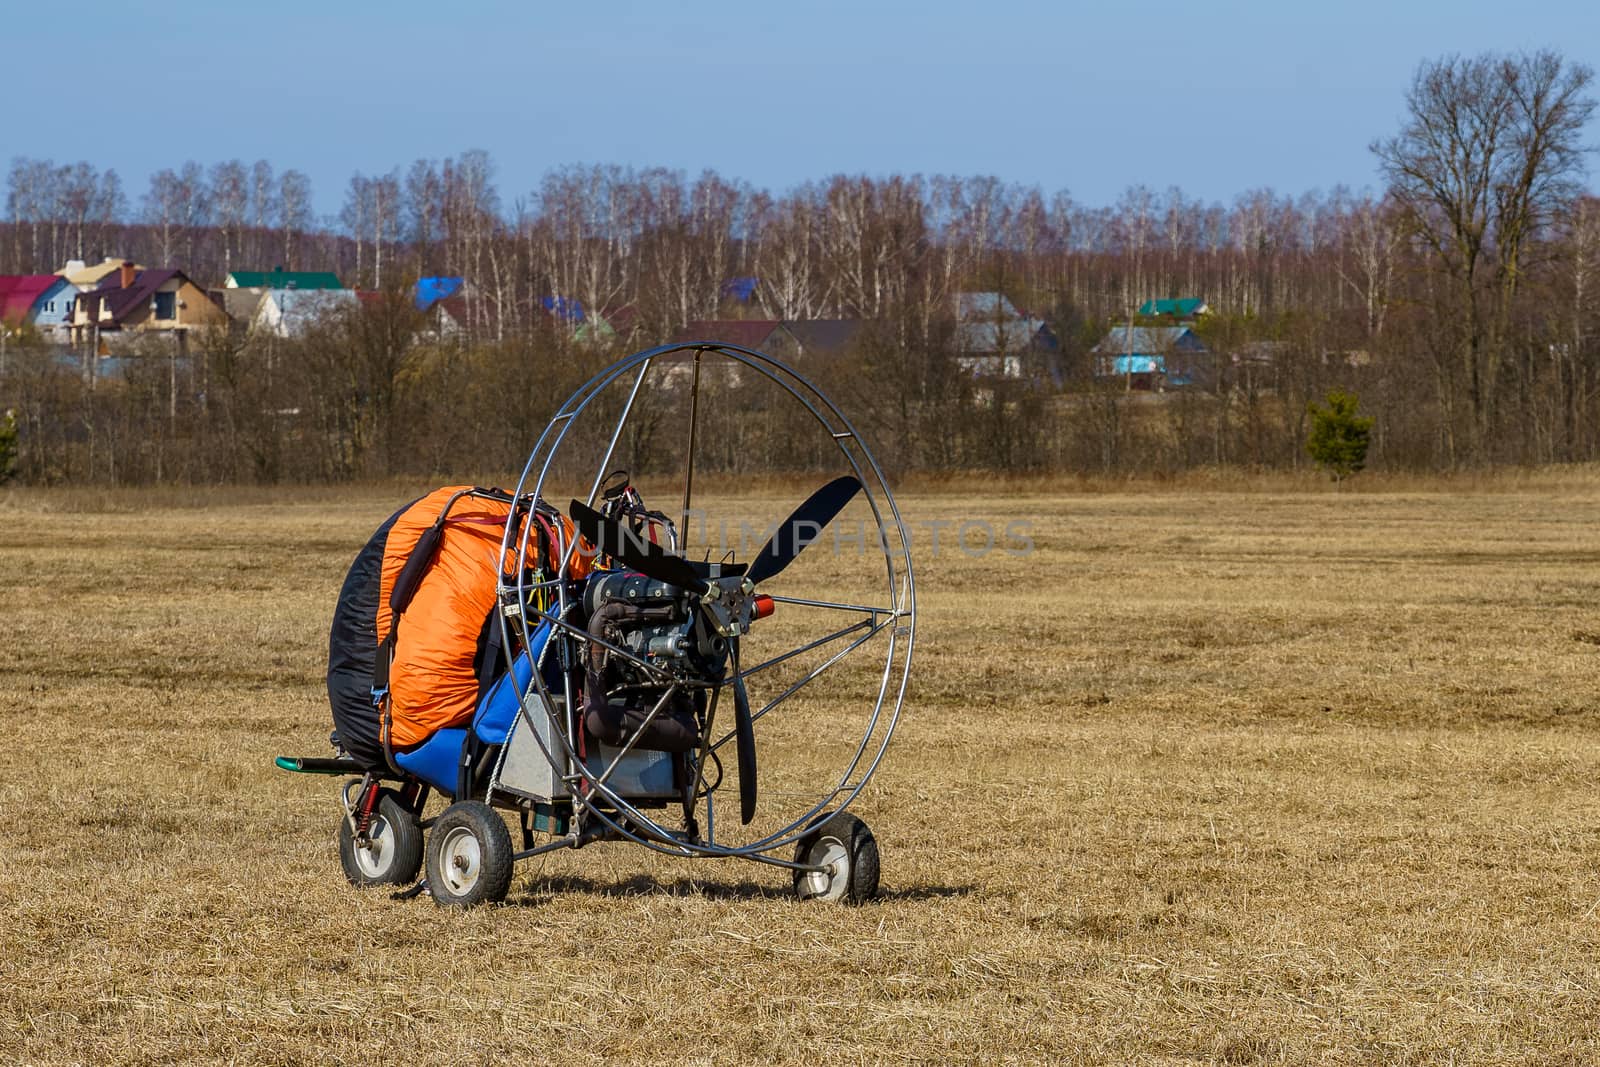 paraglider stands on the field on a sunny day prepared for flight